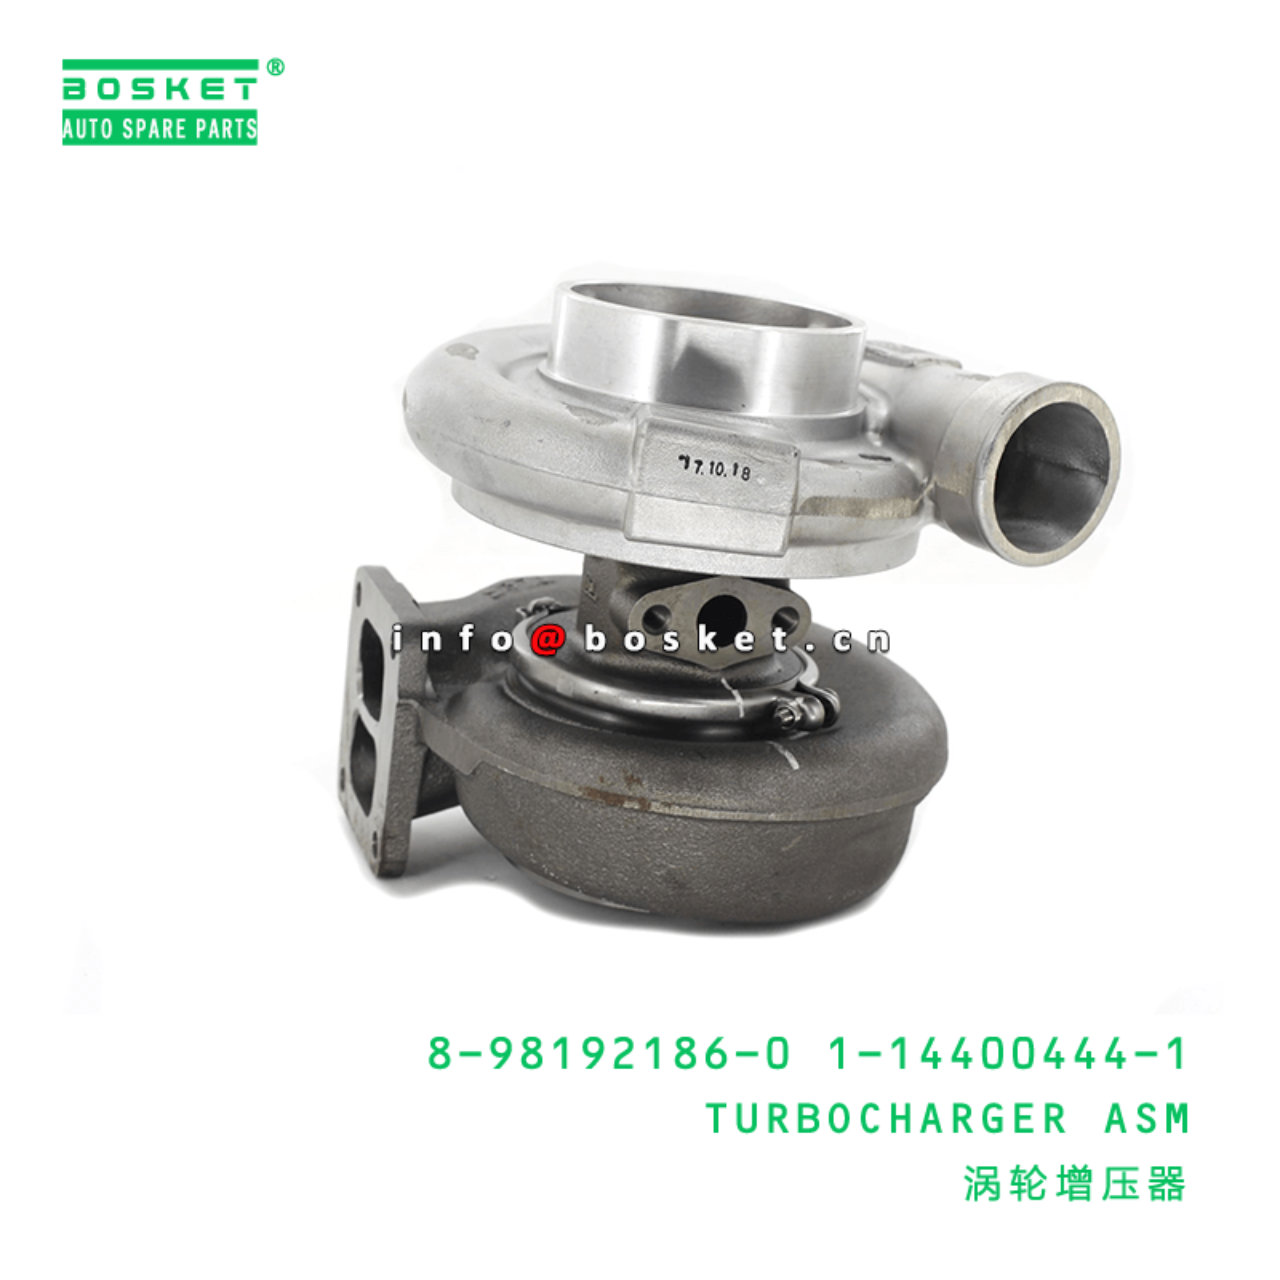  8-98192186-0 1-14400444-1 Turbocharger Assembly 8981921860 1144004441 Suitable for ISUZU XE 